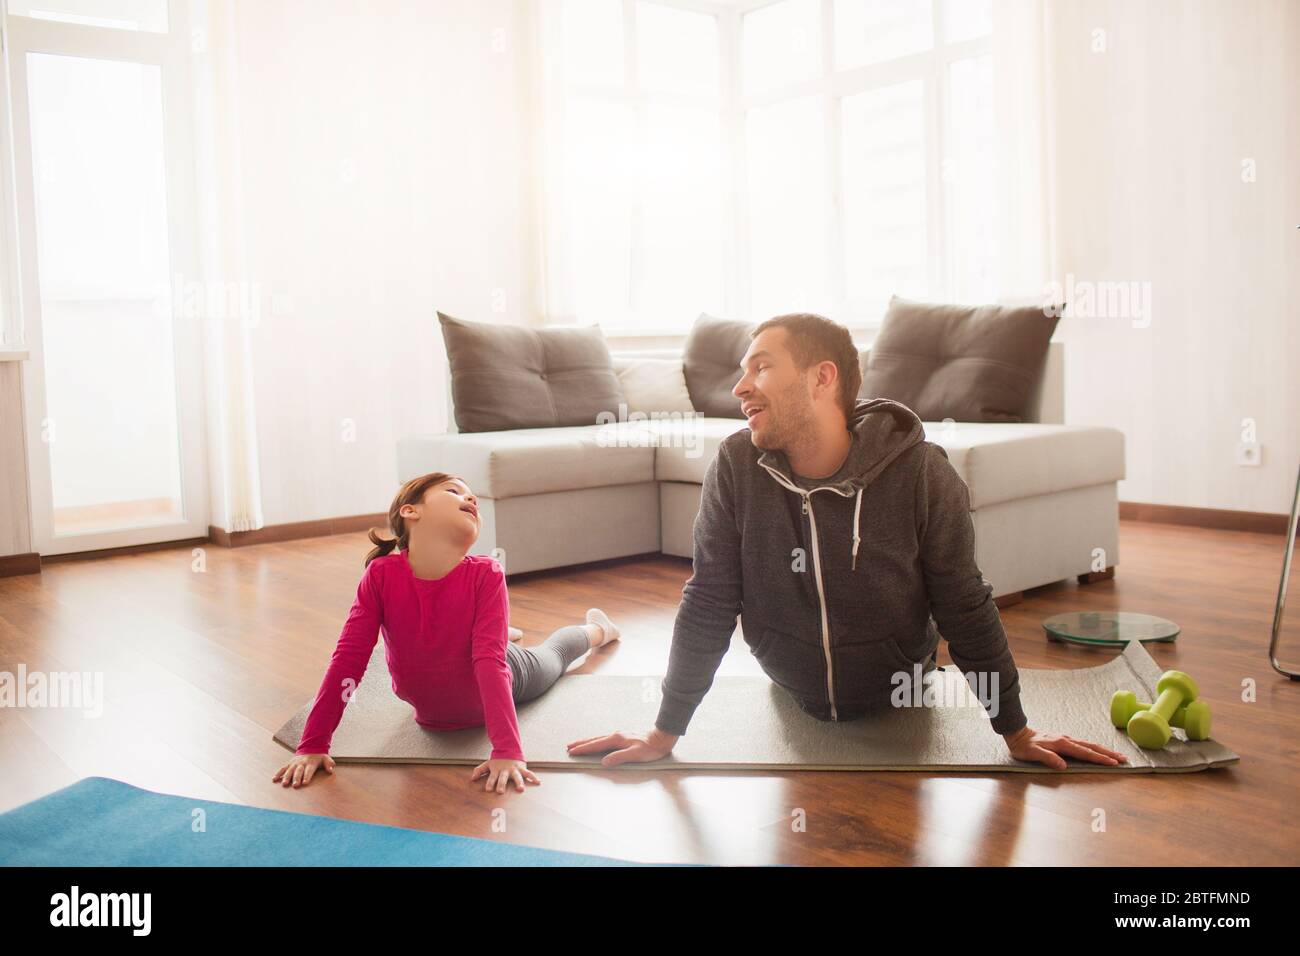 father and daughter are training at home. Workout in the apartment. Sports at home. They make faces and have fun on a yoga mat. Stock Photo